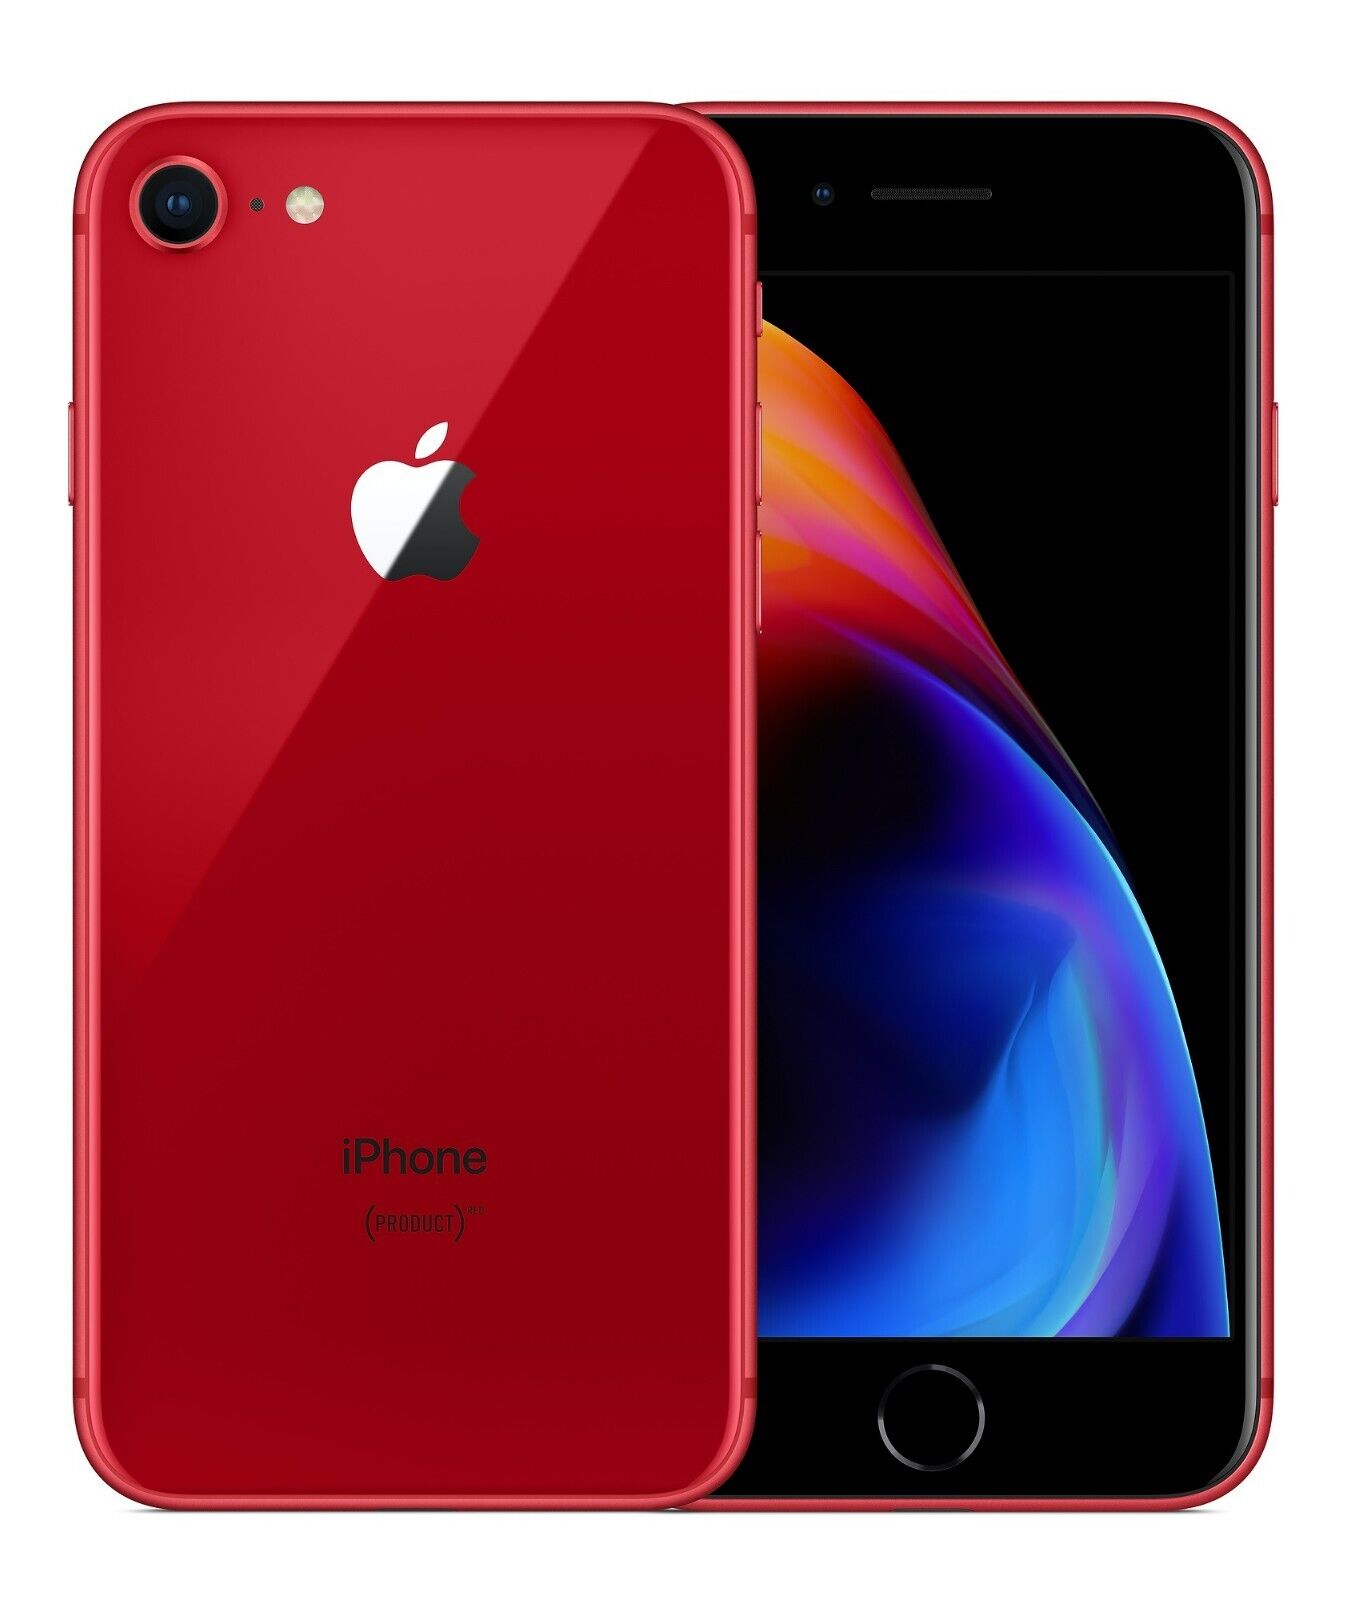 Apple iPhone 8 (PRODUCT)RED - 64GB - (Unlocked) A1863 (CDMA + GSM)